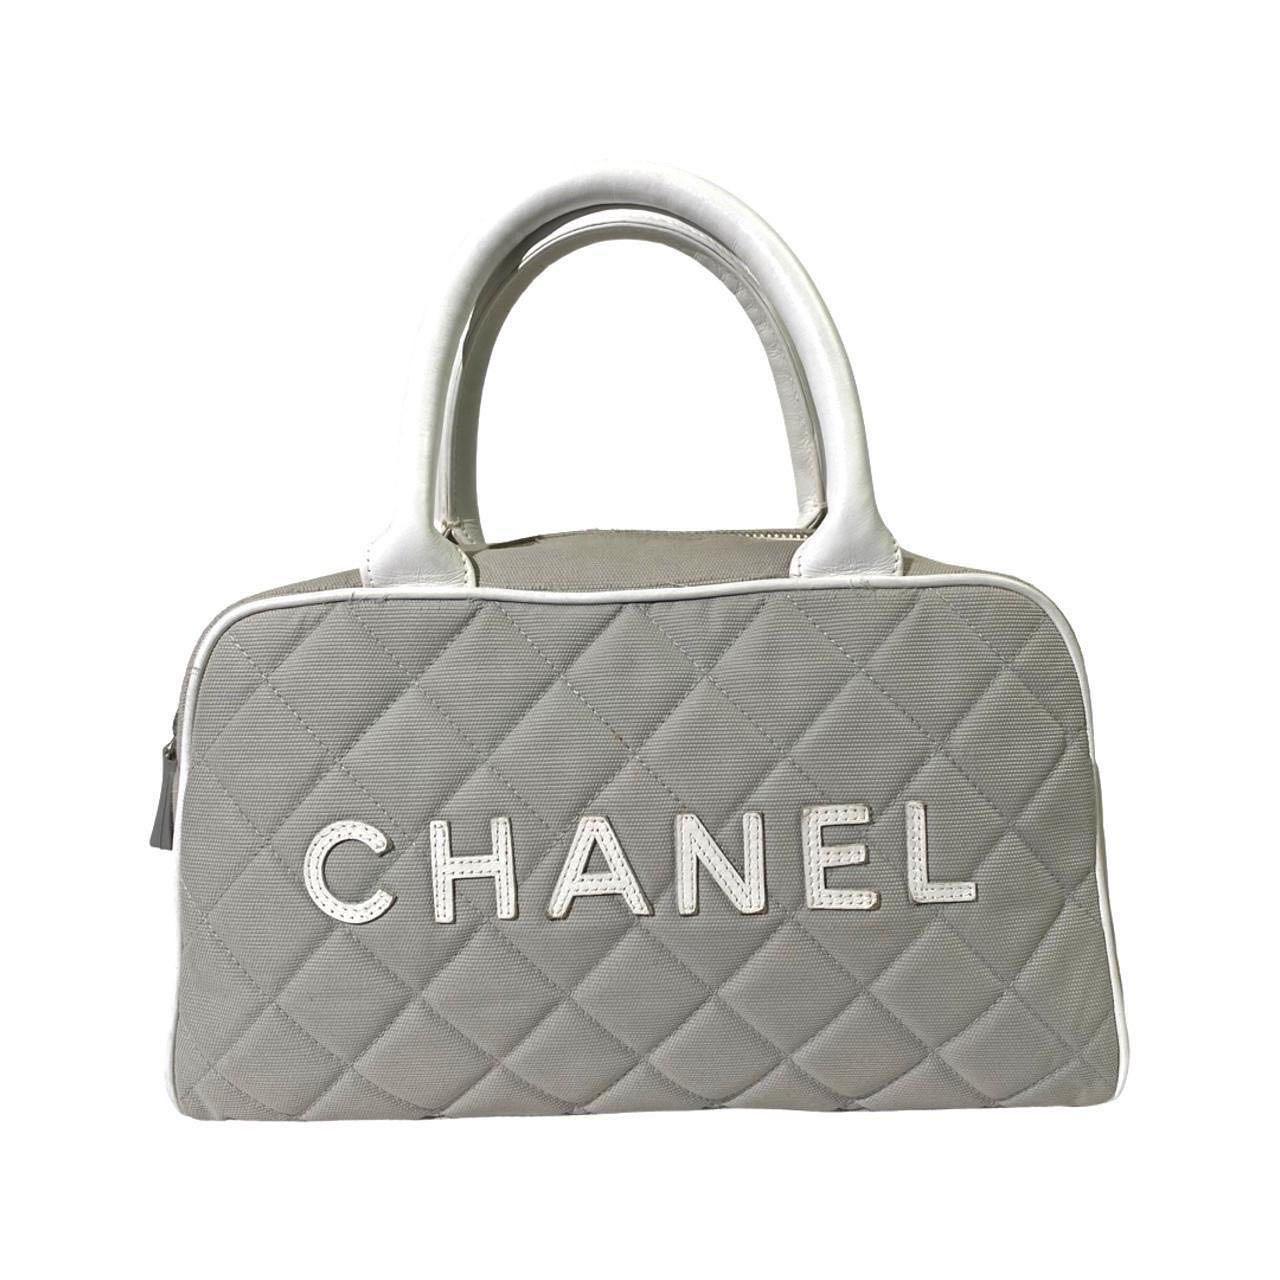 Chanel 2000s Sport Gray Quilted Canvas Mini Handbag For Sale 3